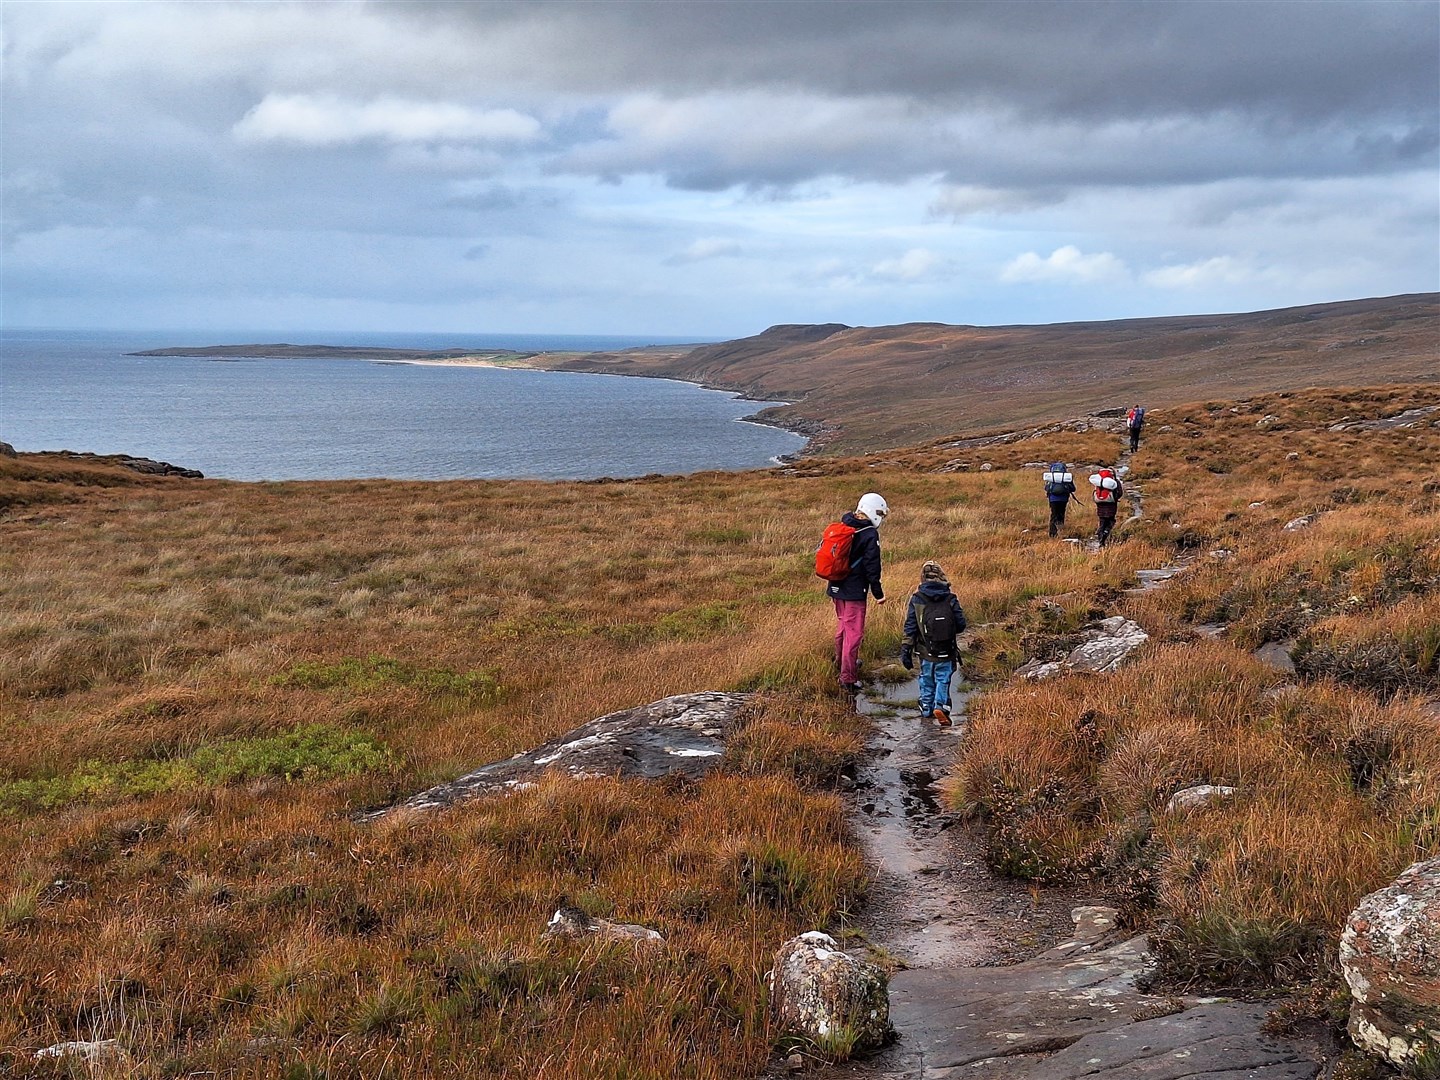 The walk in to Craig bothy on the west coast.